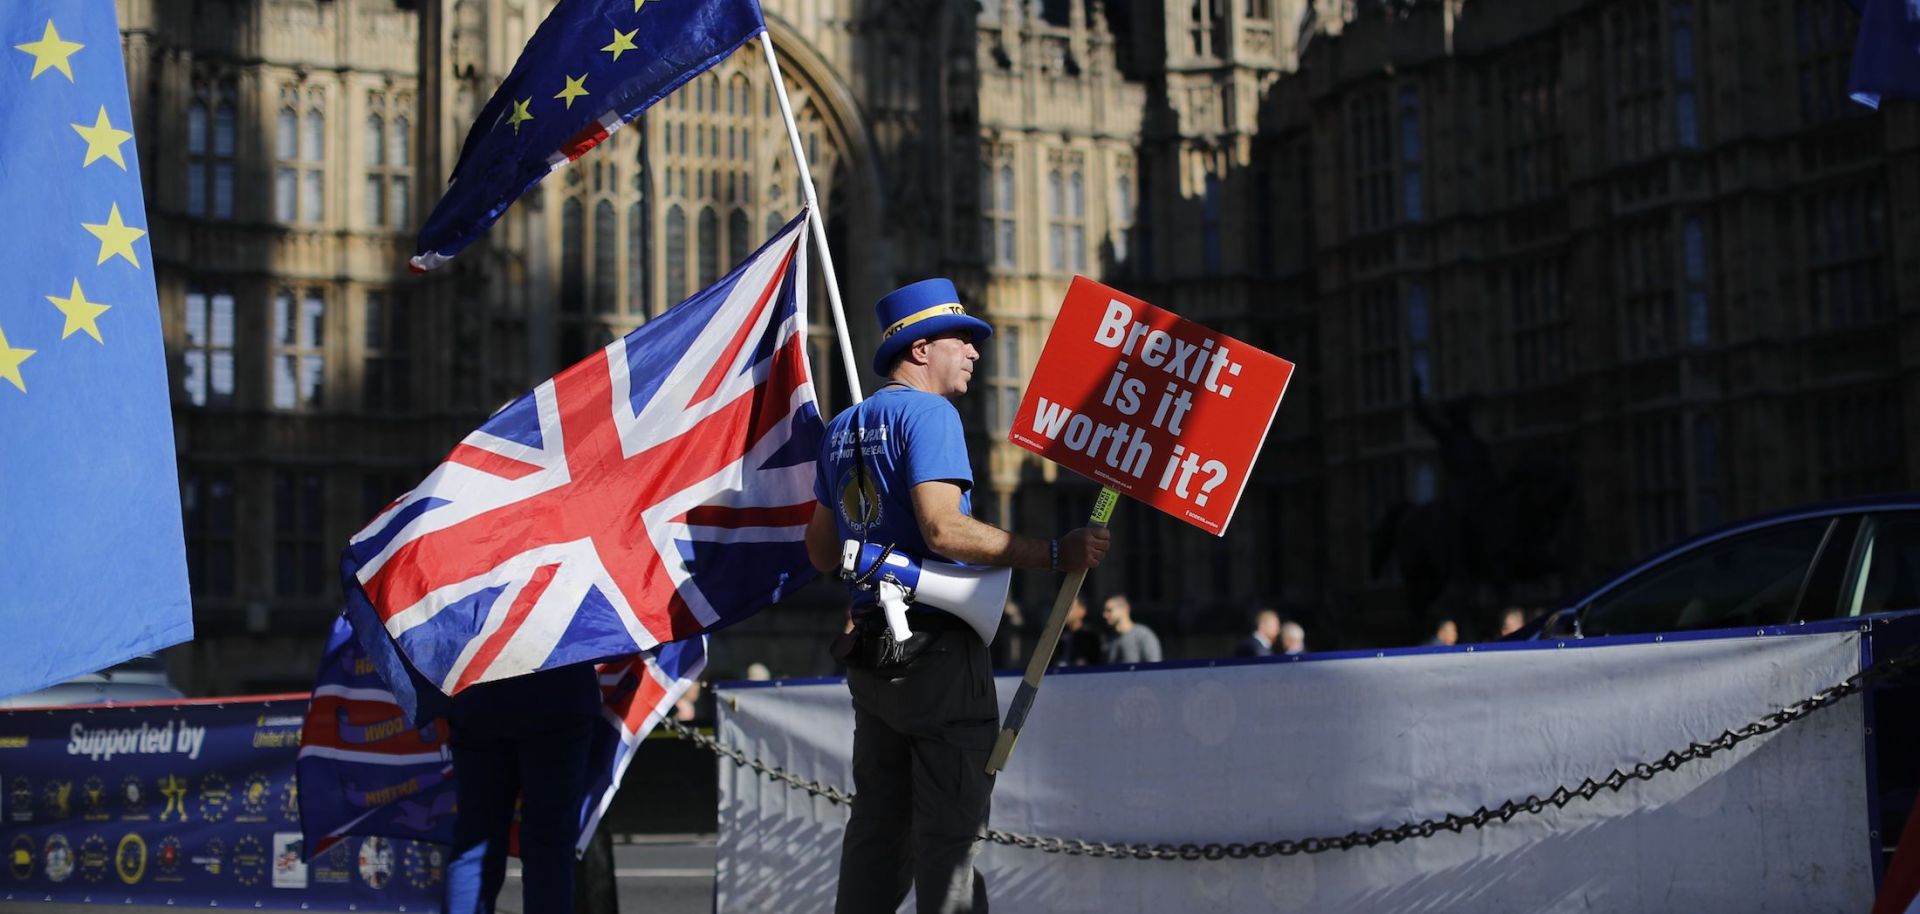 An anti-Brexit protester stands outside the British Parliament in London on Oct. 9, 2018.